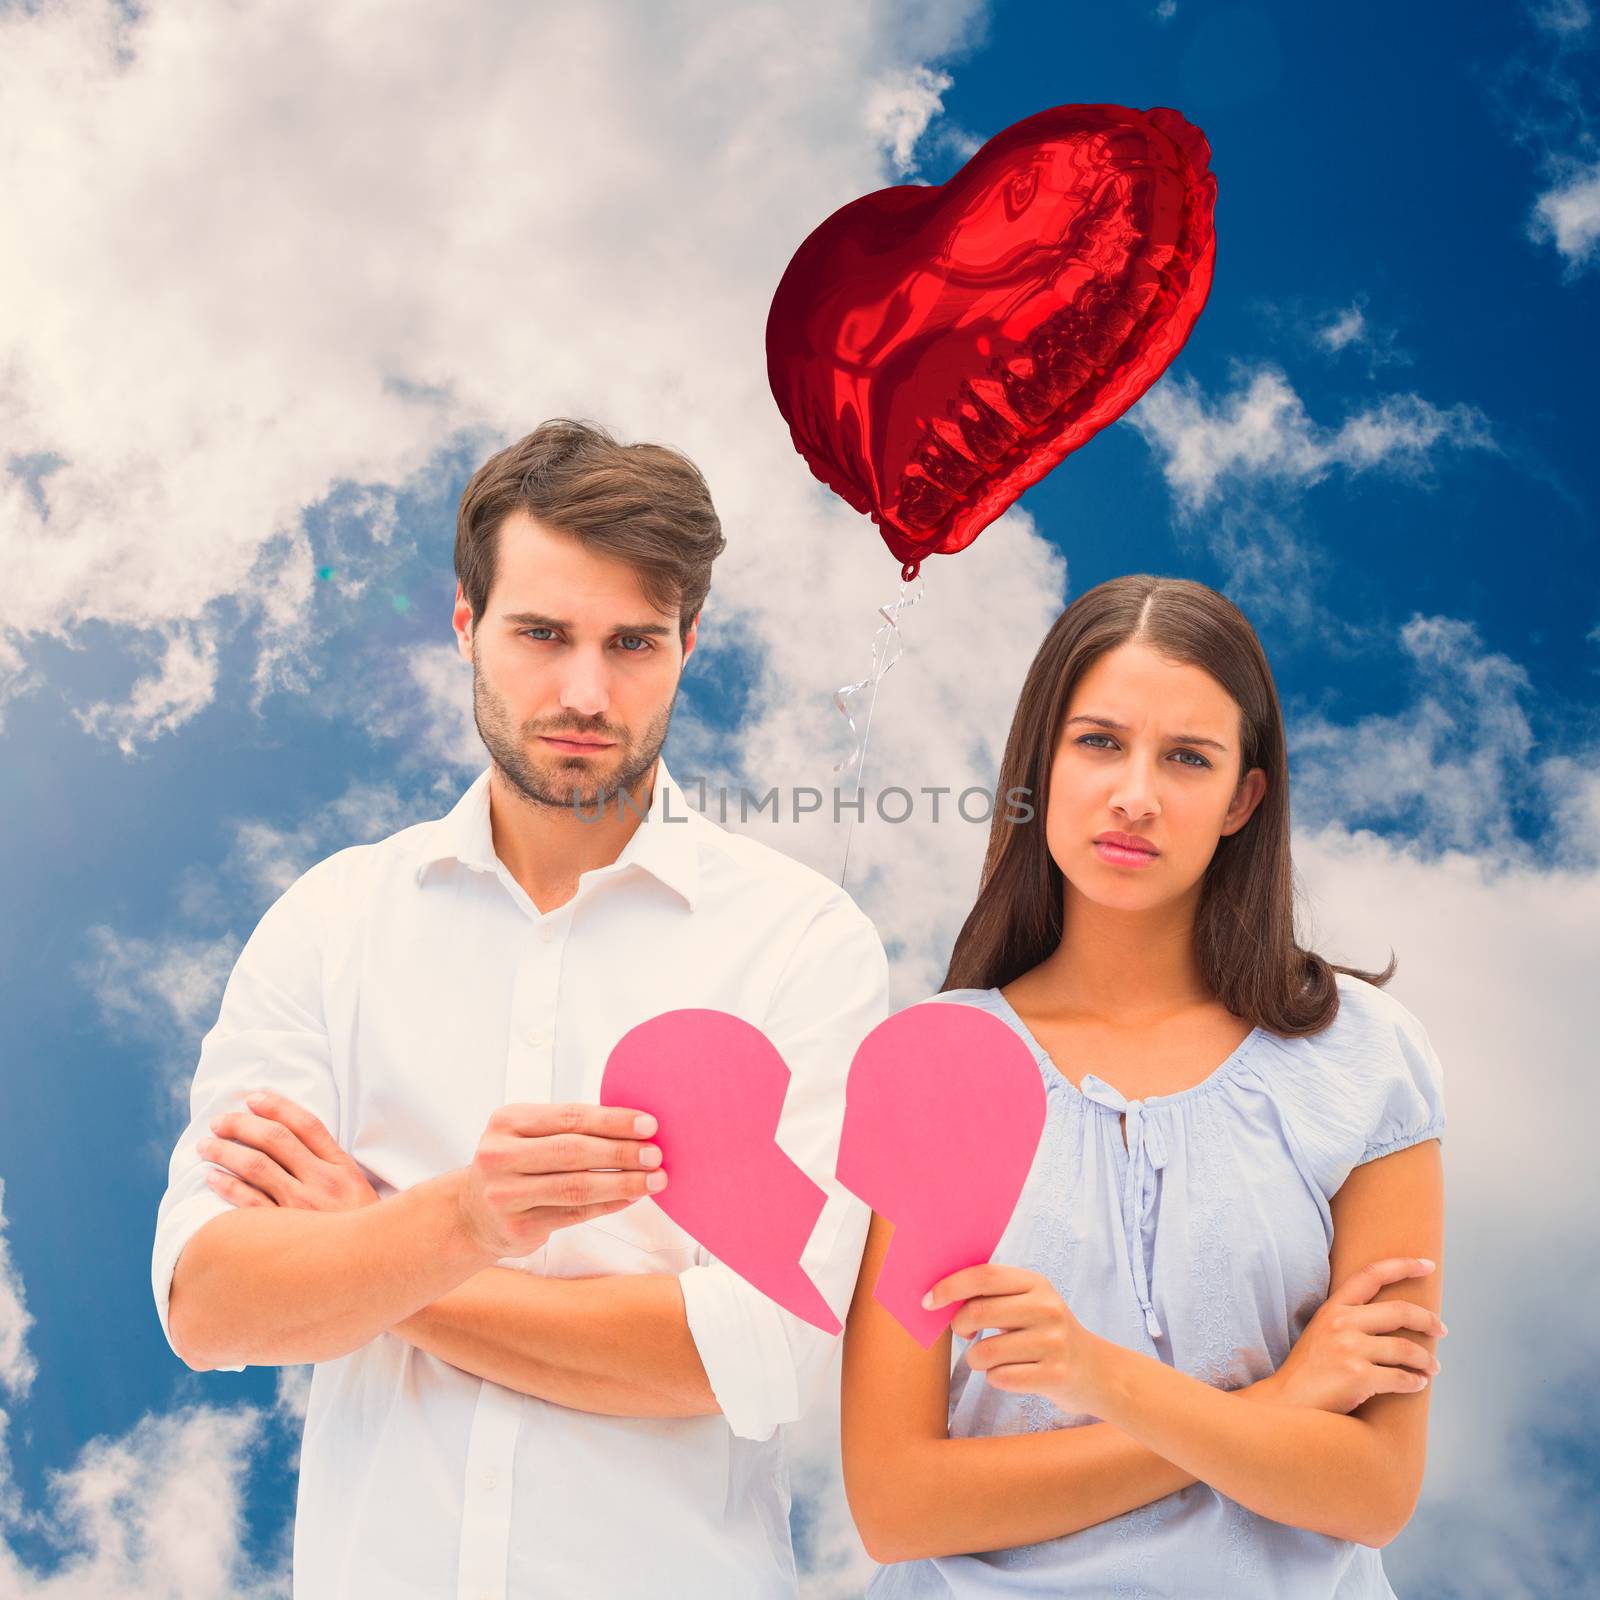 Upset couple holding two halves of broken heart against bright blue sky with clouds